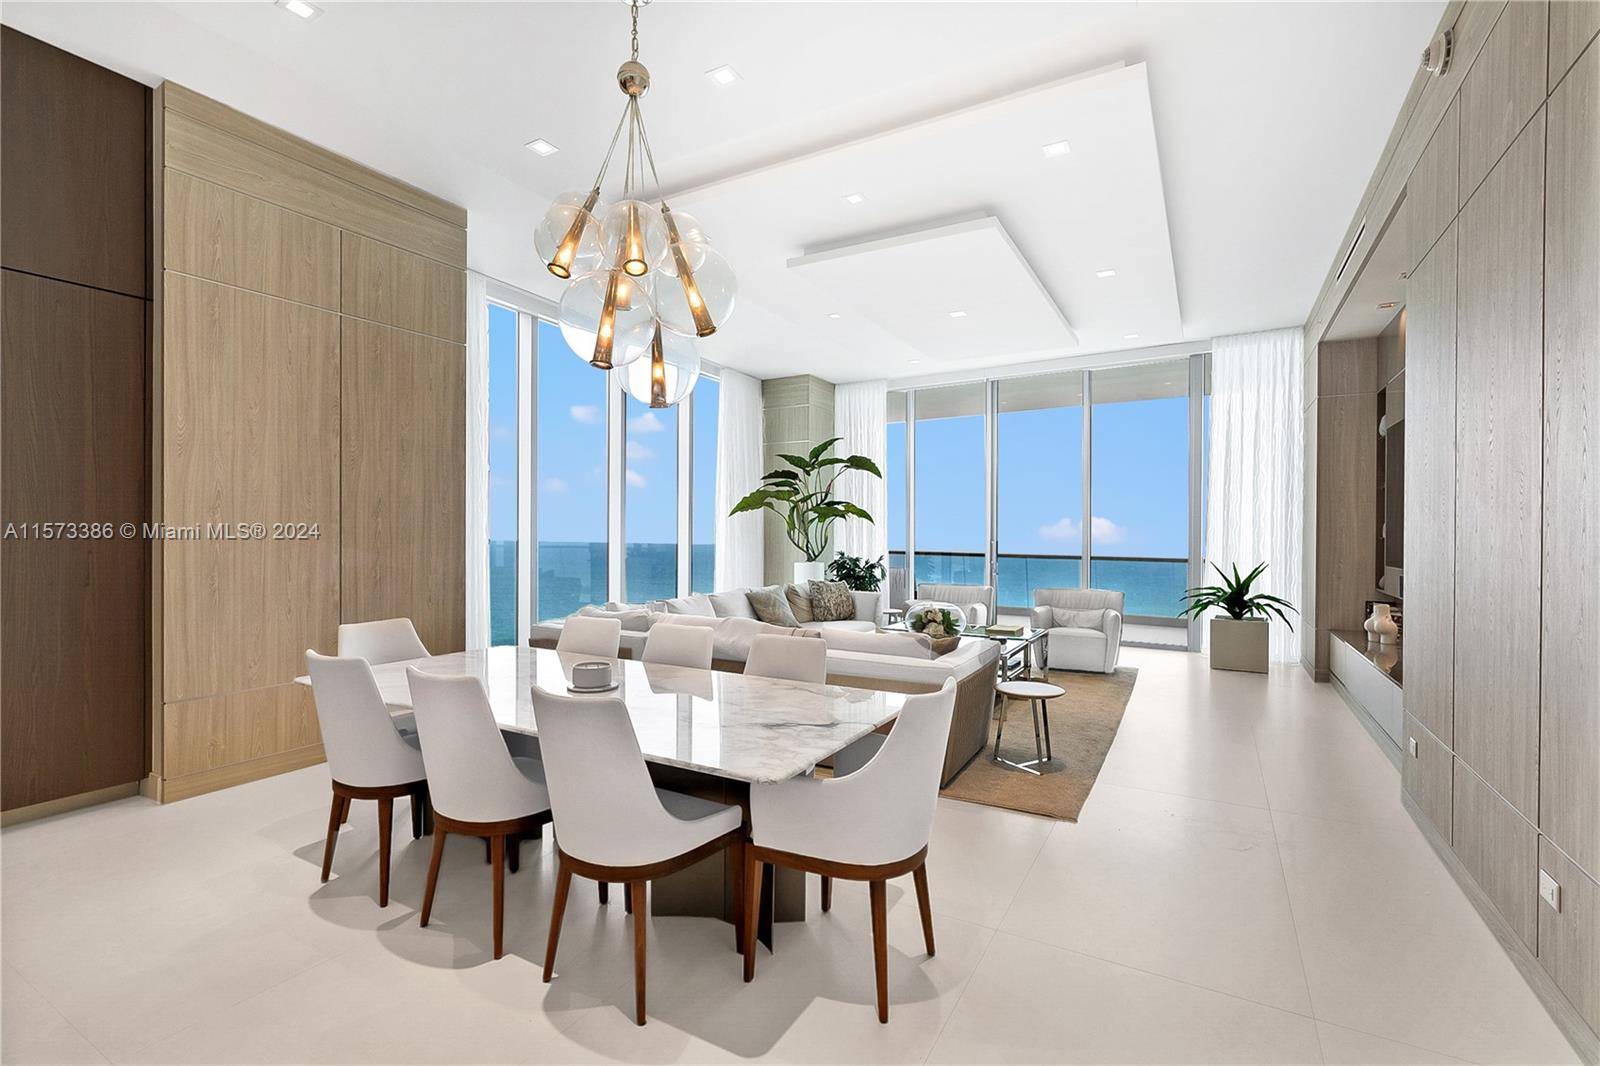 Breathtaking High Floor Residence that was finished and furnished by a renowned design firm with no expense spared while creating this masterpiece which offers Ocean, Downtown skyline sunsets and bay ...